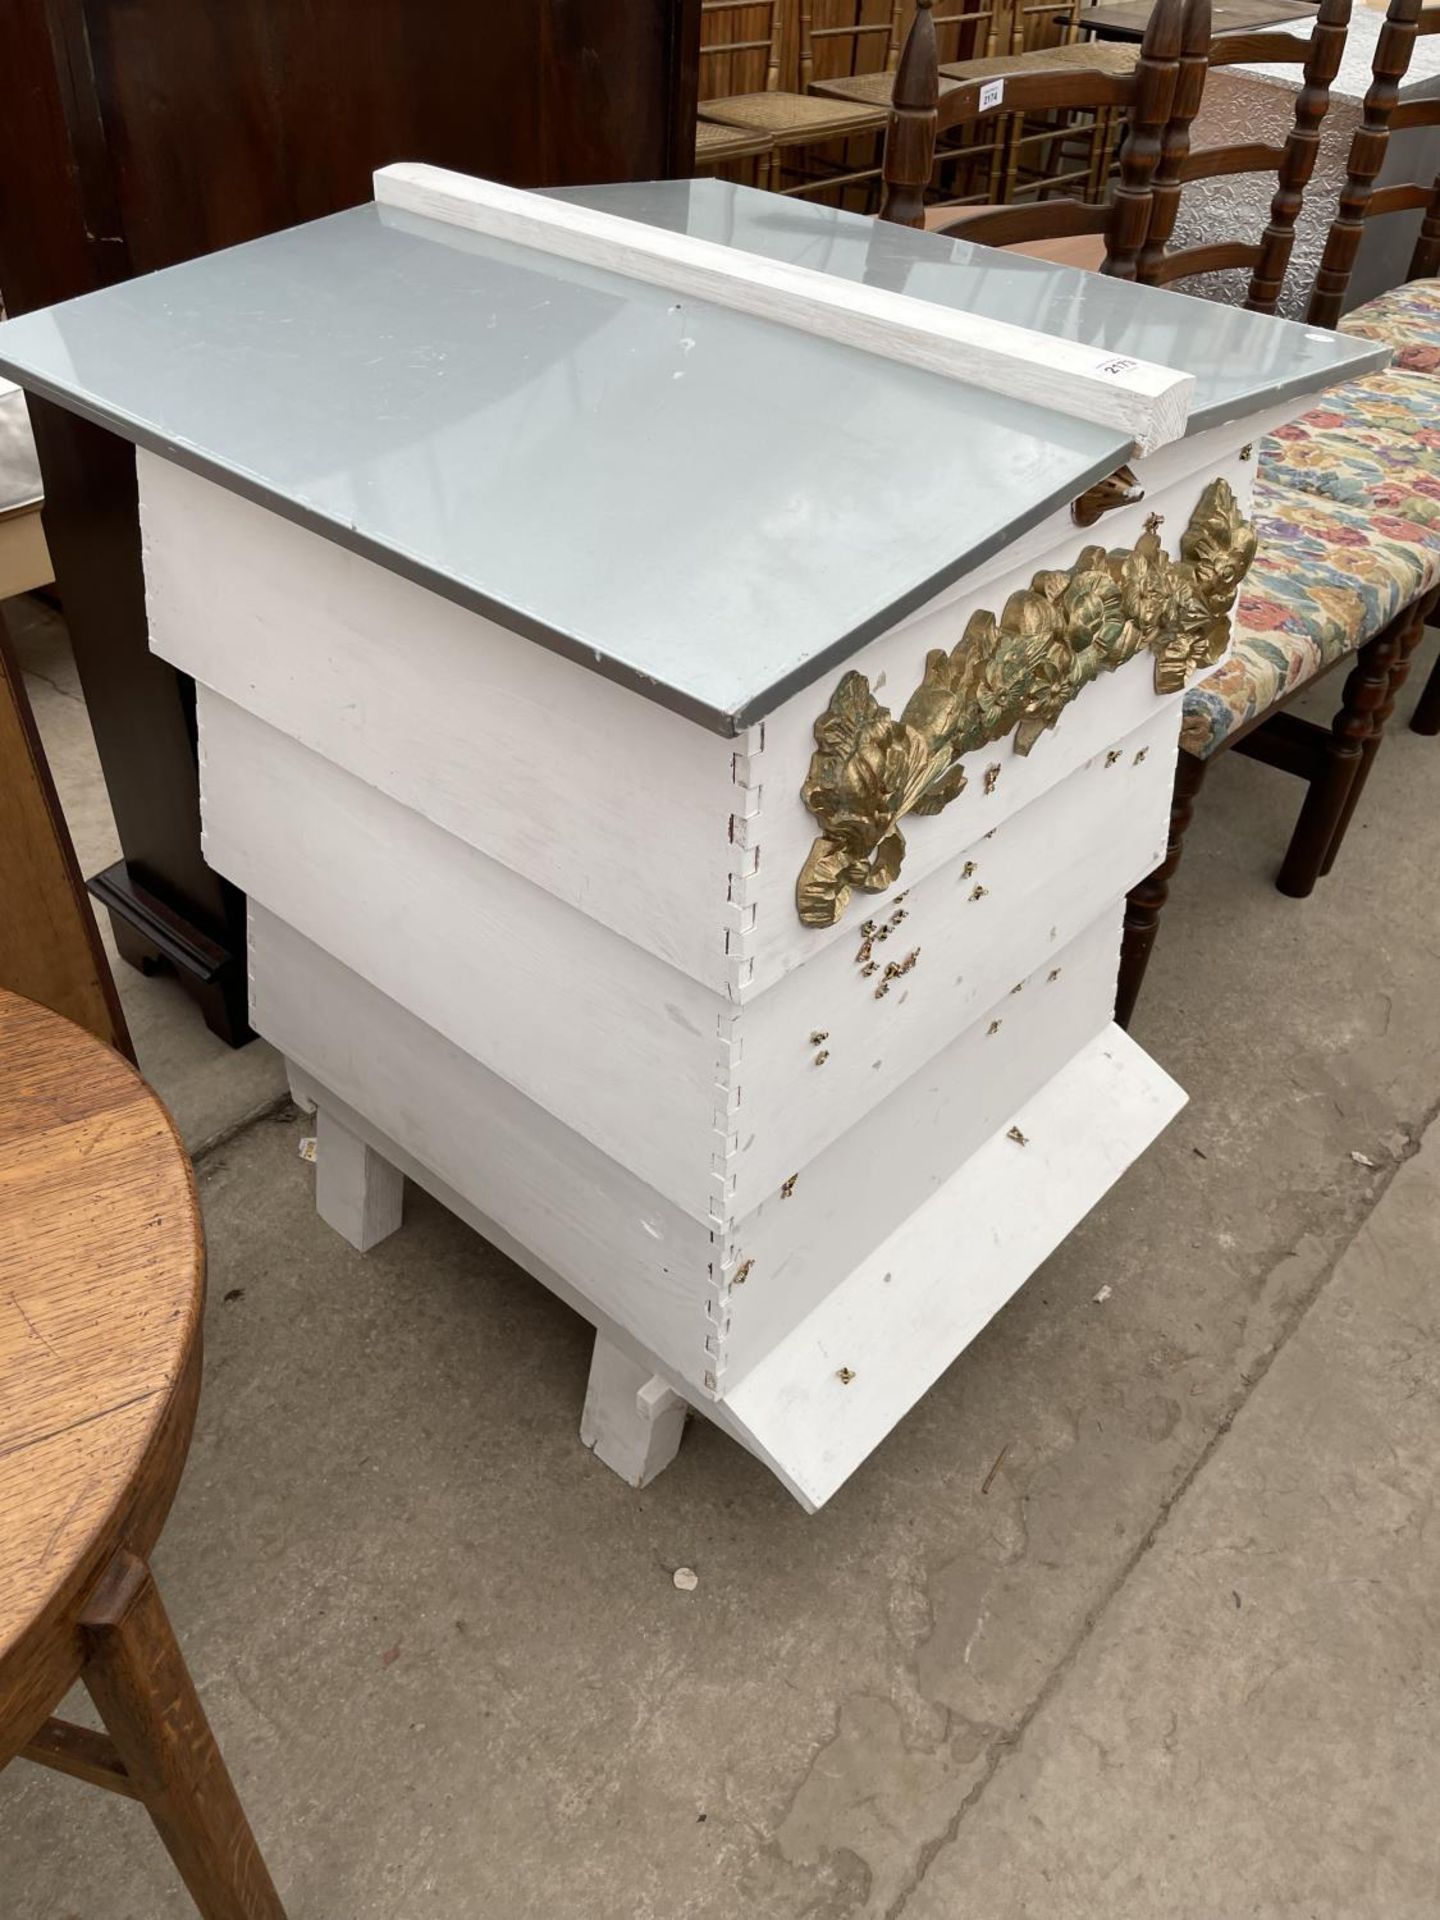 A FOUR TIER WHITE PAINTED FORMER BEEHIVE, DECORATED WITH BEES AND FLOWERS